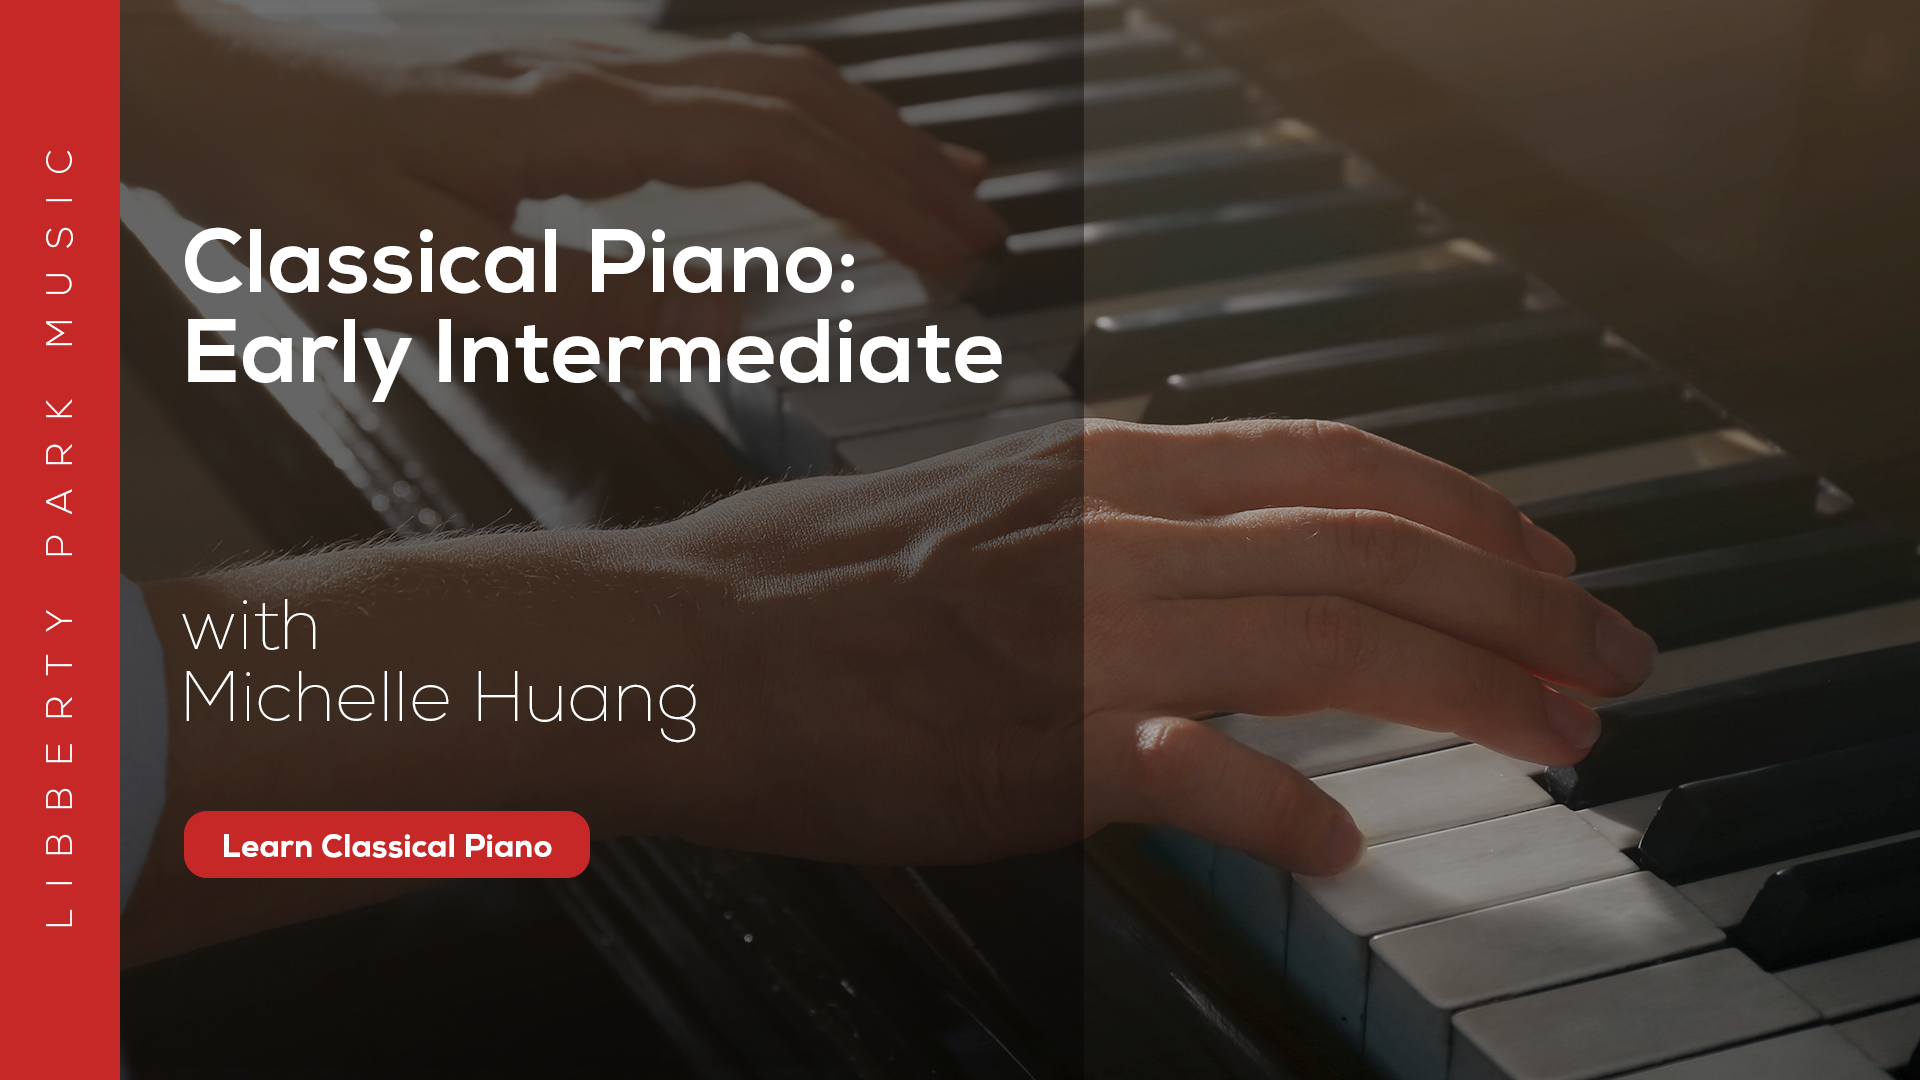 Online piano lessons for early intermediate level